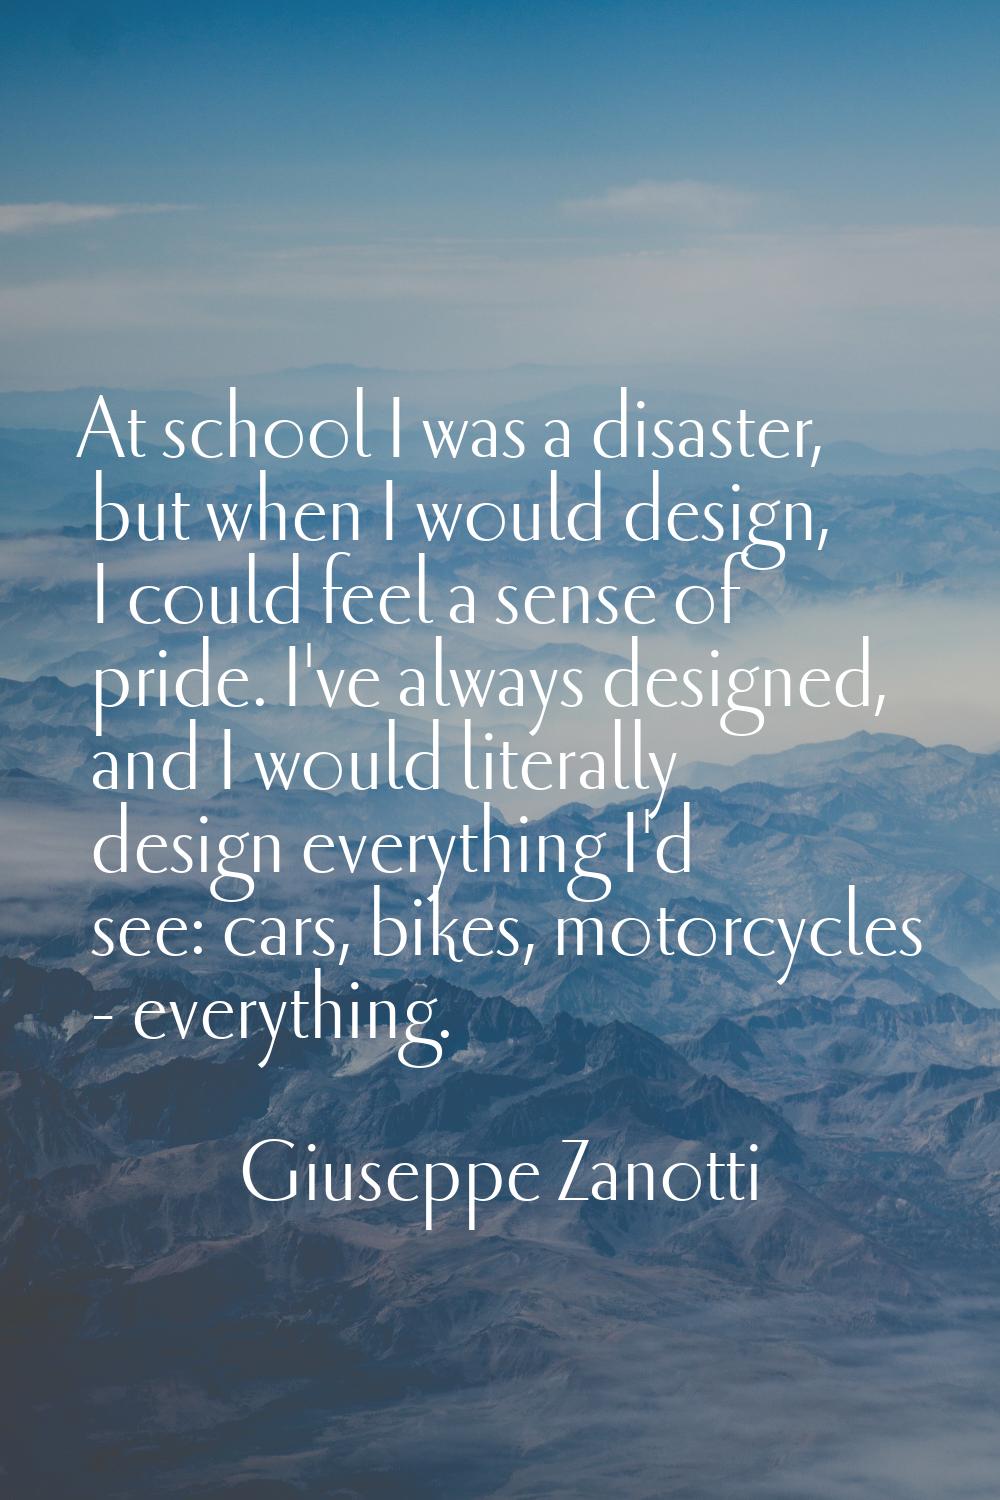 At school I was a disaster, but when I would design, I could feel a sense of pride. I've always des